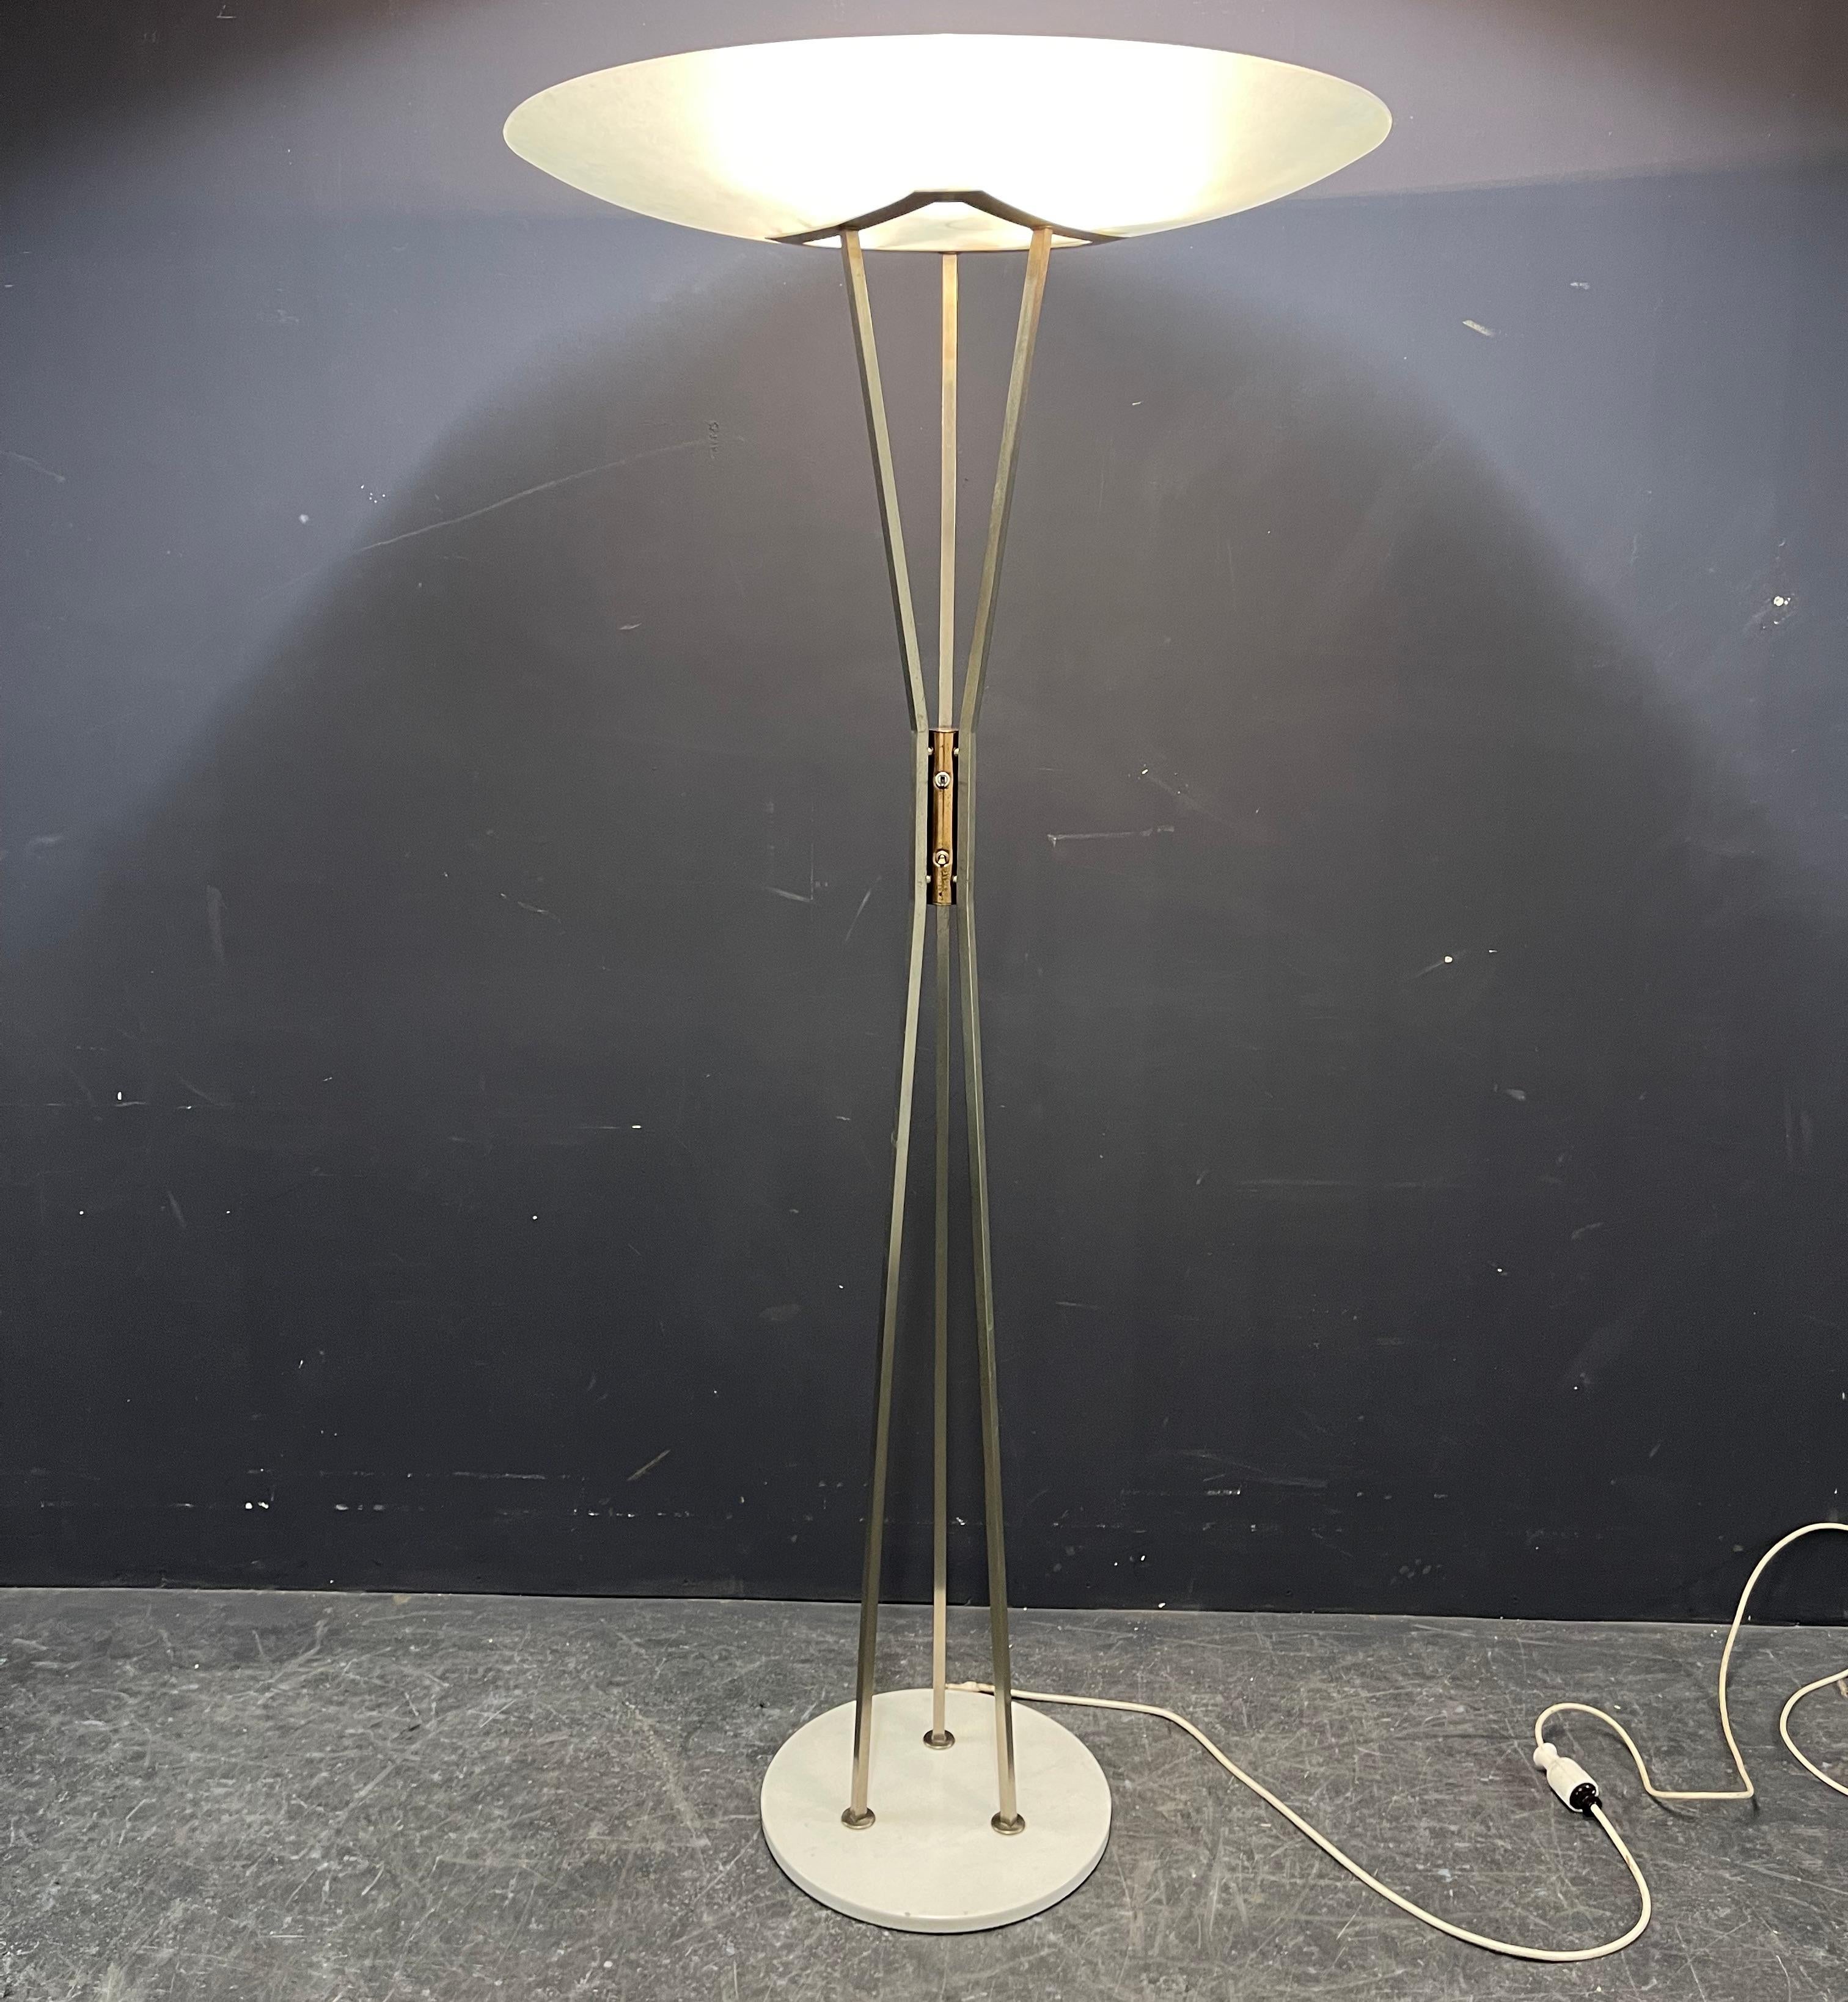 Previous unknown version of stilnovo´s famous lamp. normally the lamp has round tubes and a round lamp holder under the glass shade. most of the lamps are made for brass. this one is nickel plated and has a triangular lamp holder. the glas shade has